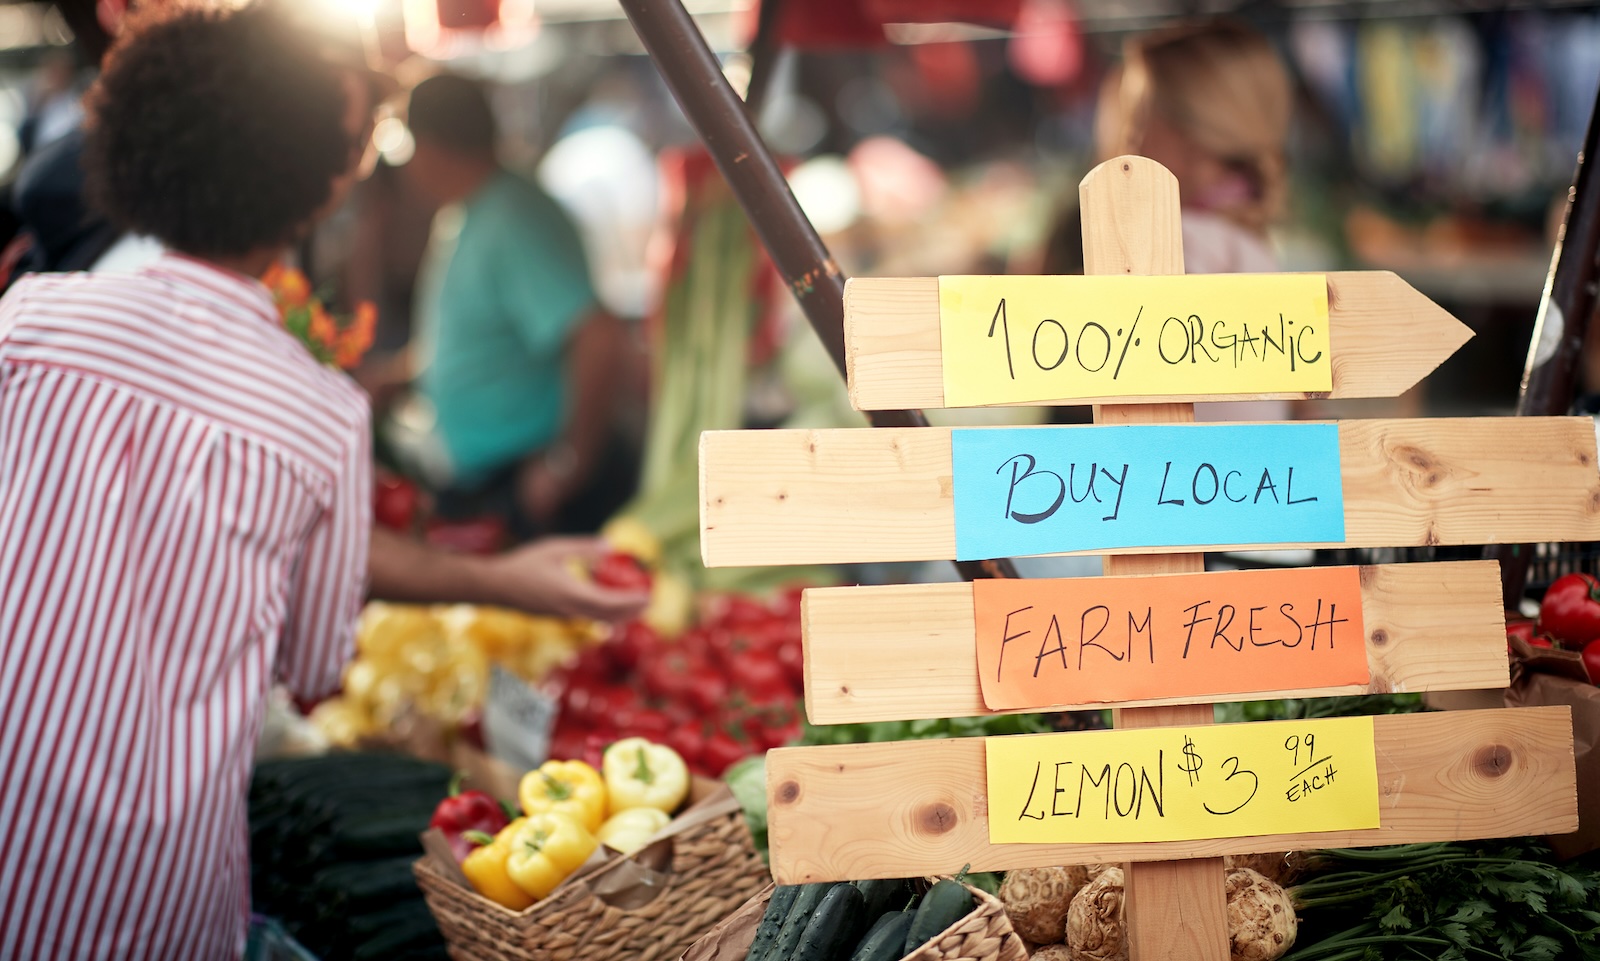 Sign for fresh and organic vegetables at a farmers market. Photo 197900466 © Igor Mojzes | Dreamstime